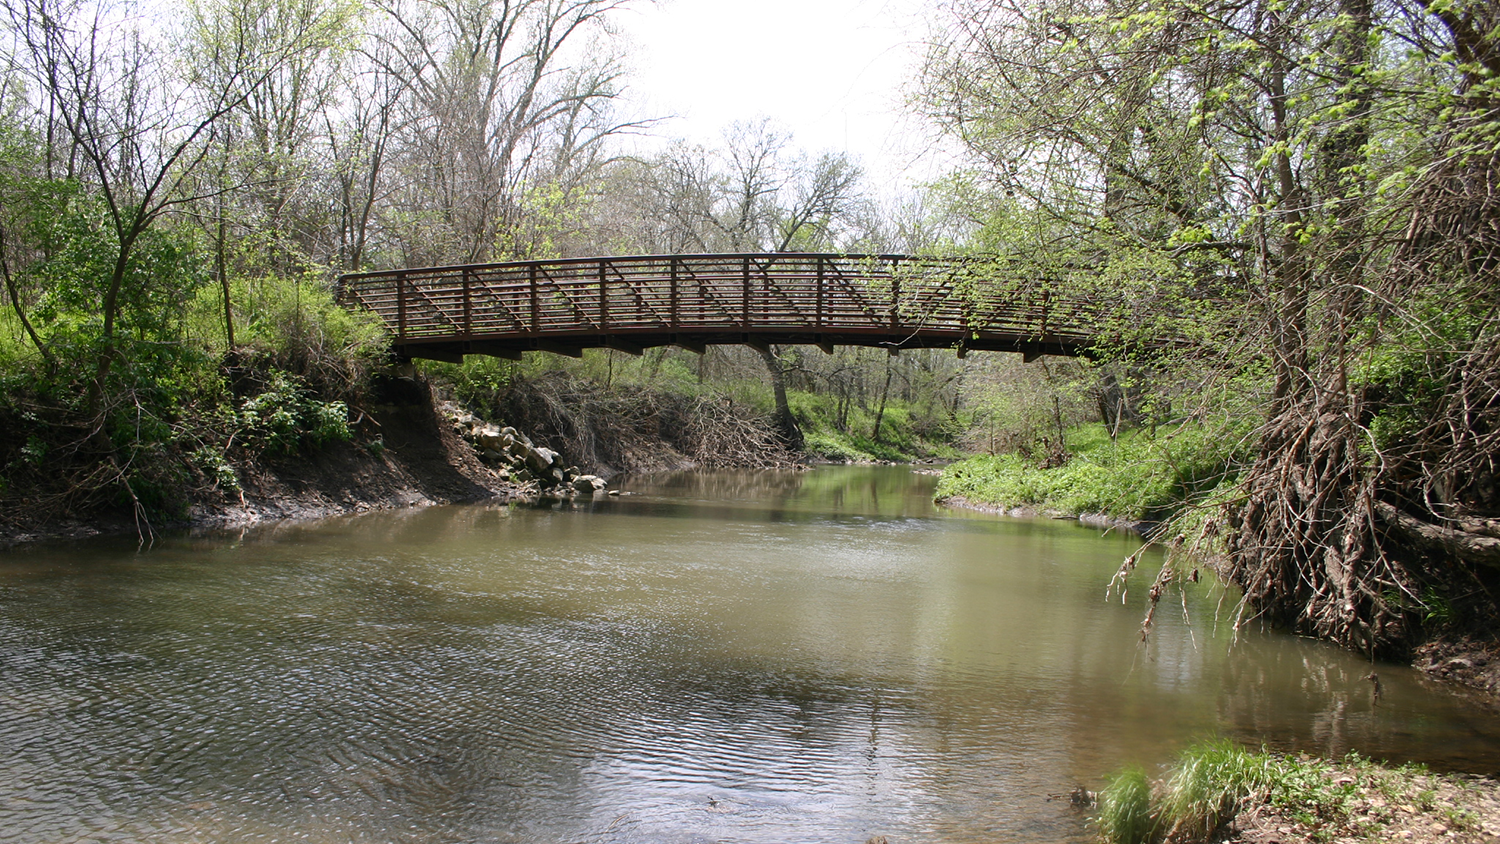 A bridge spans across a stream lined with trees at the Overland Park Arboretum & Botanical Gardens.